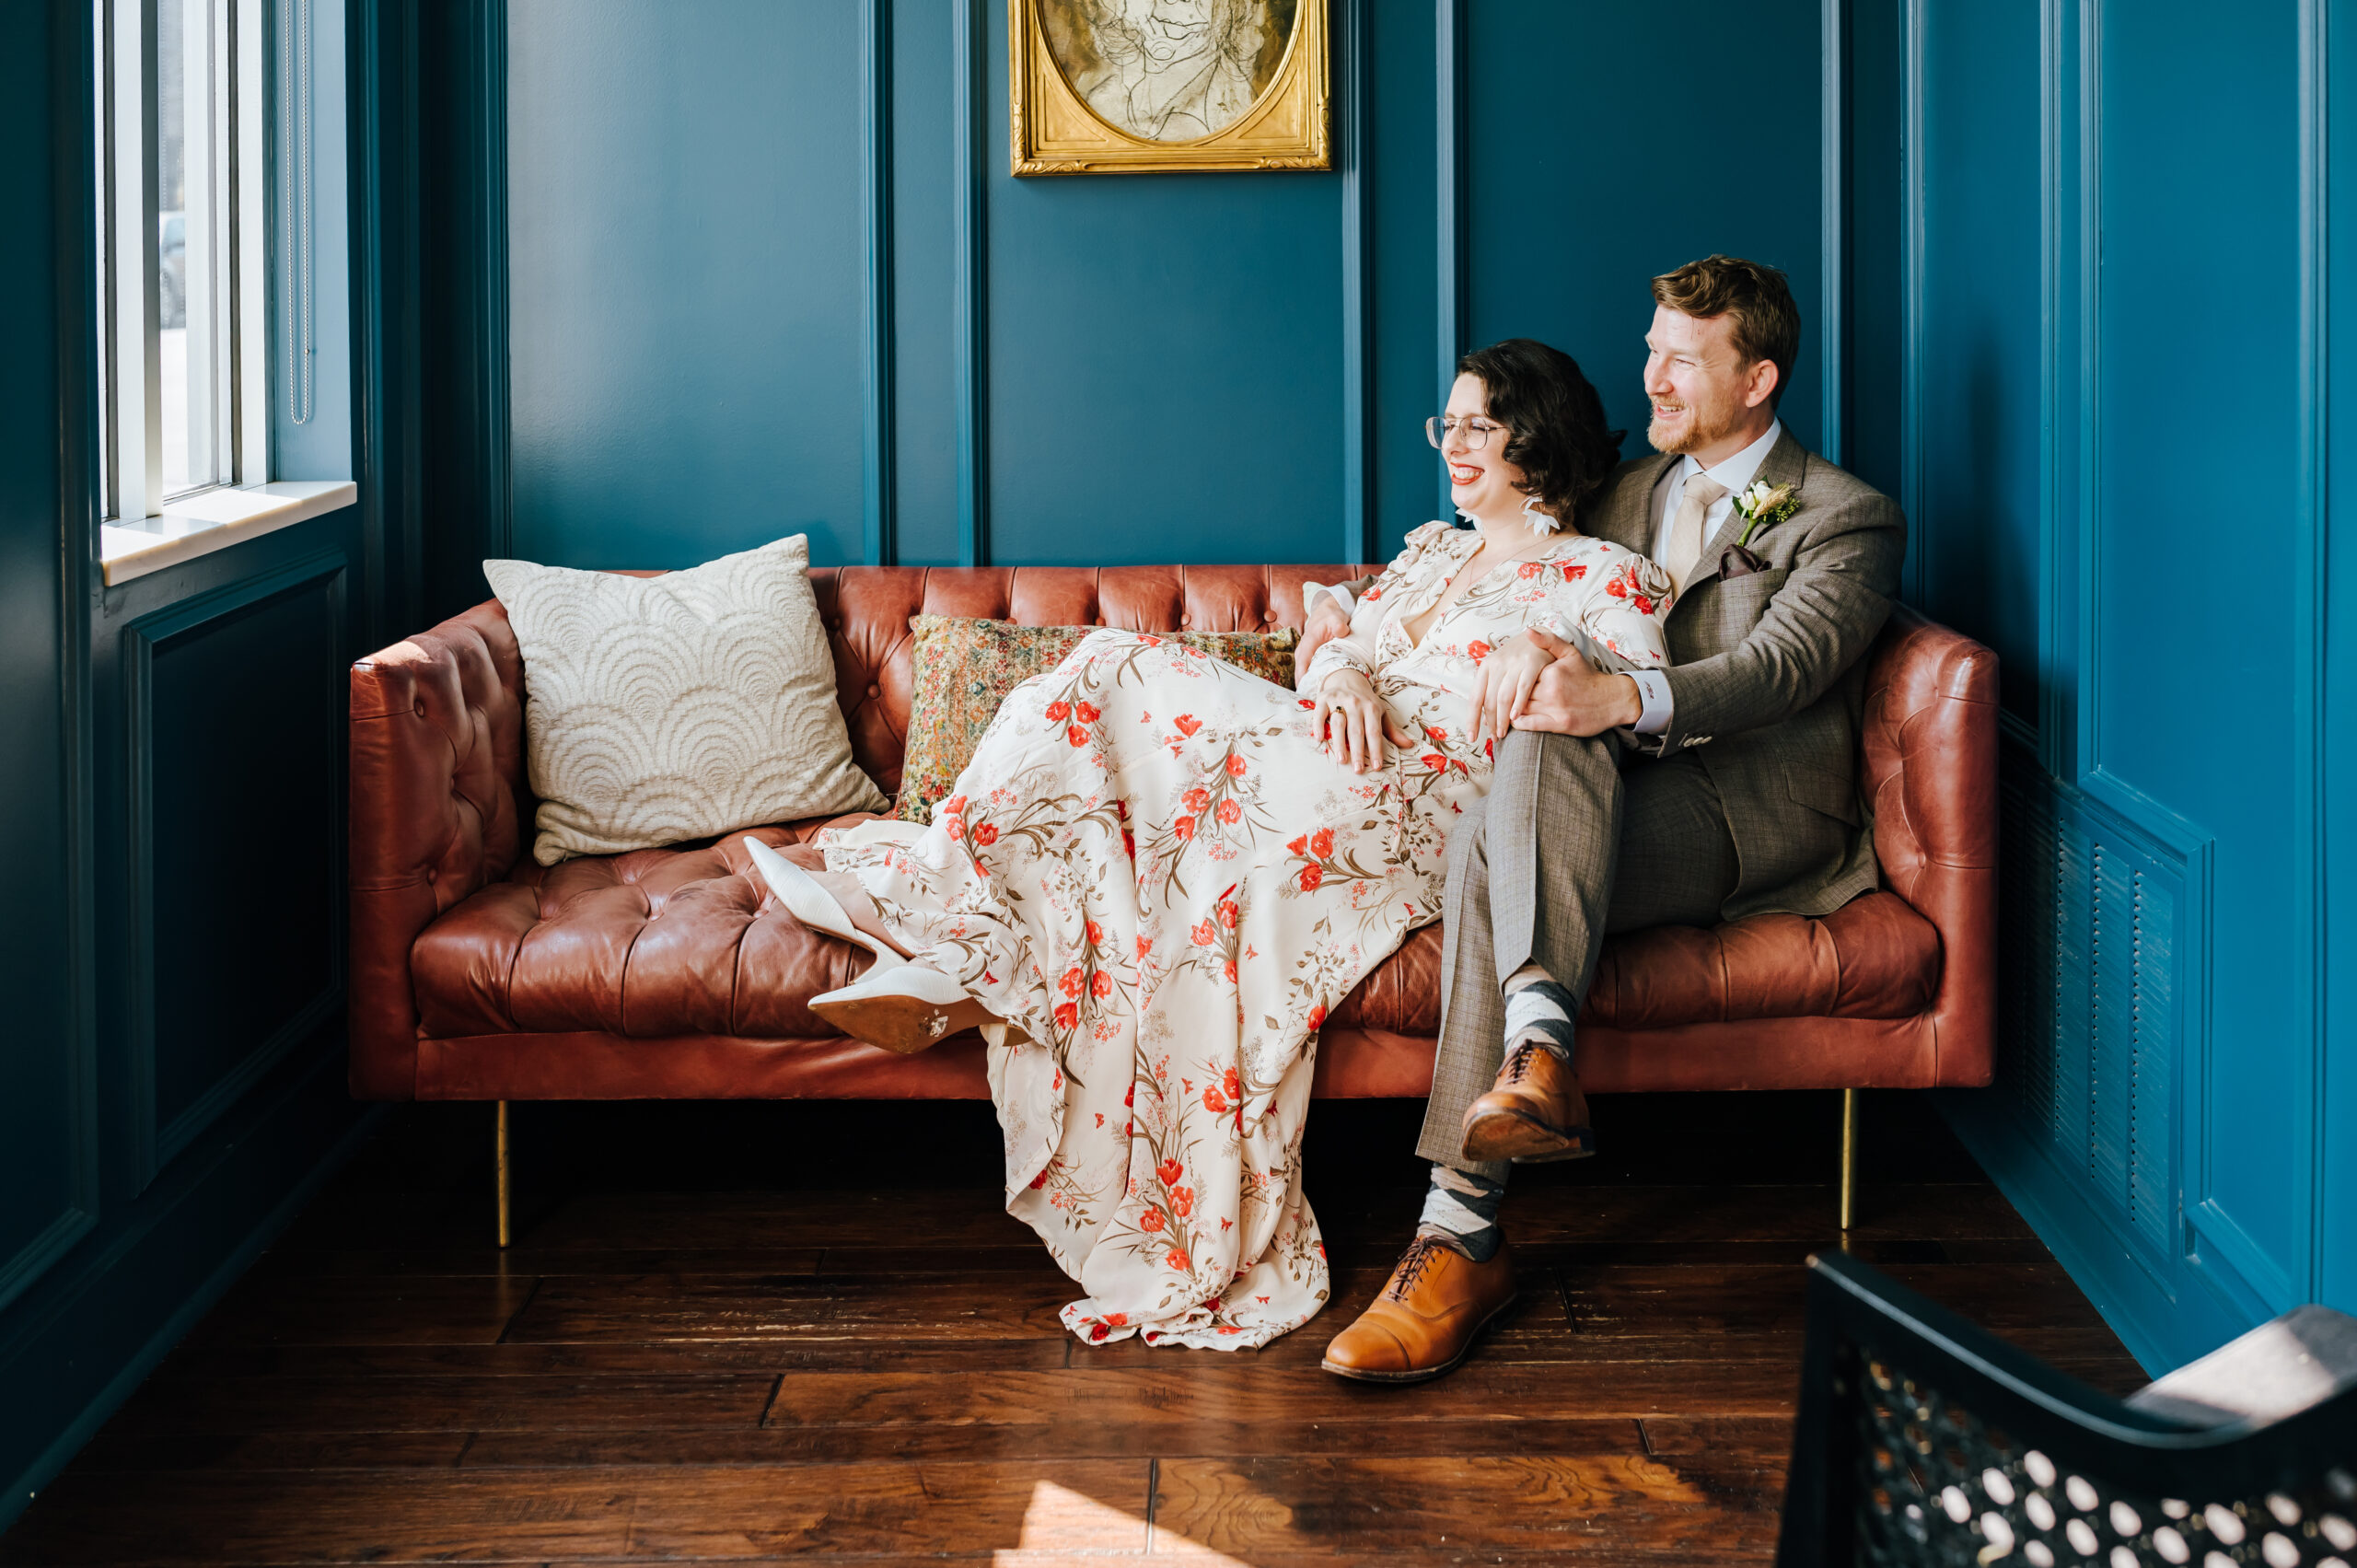 Newlyweds look out the window as they sit on a pink leather couch